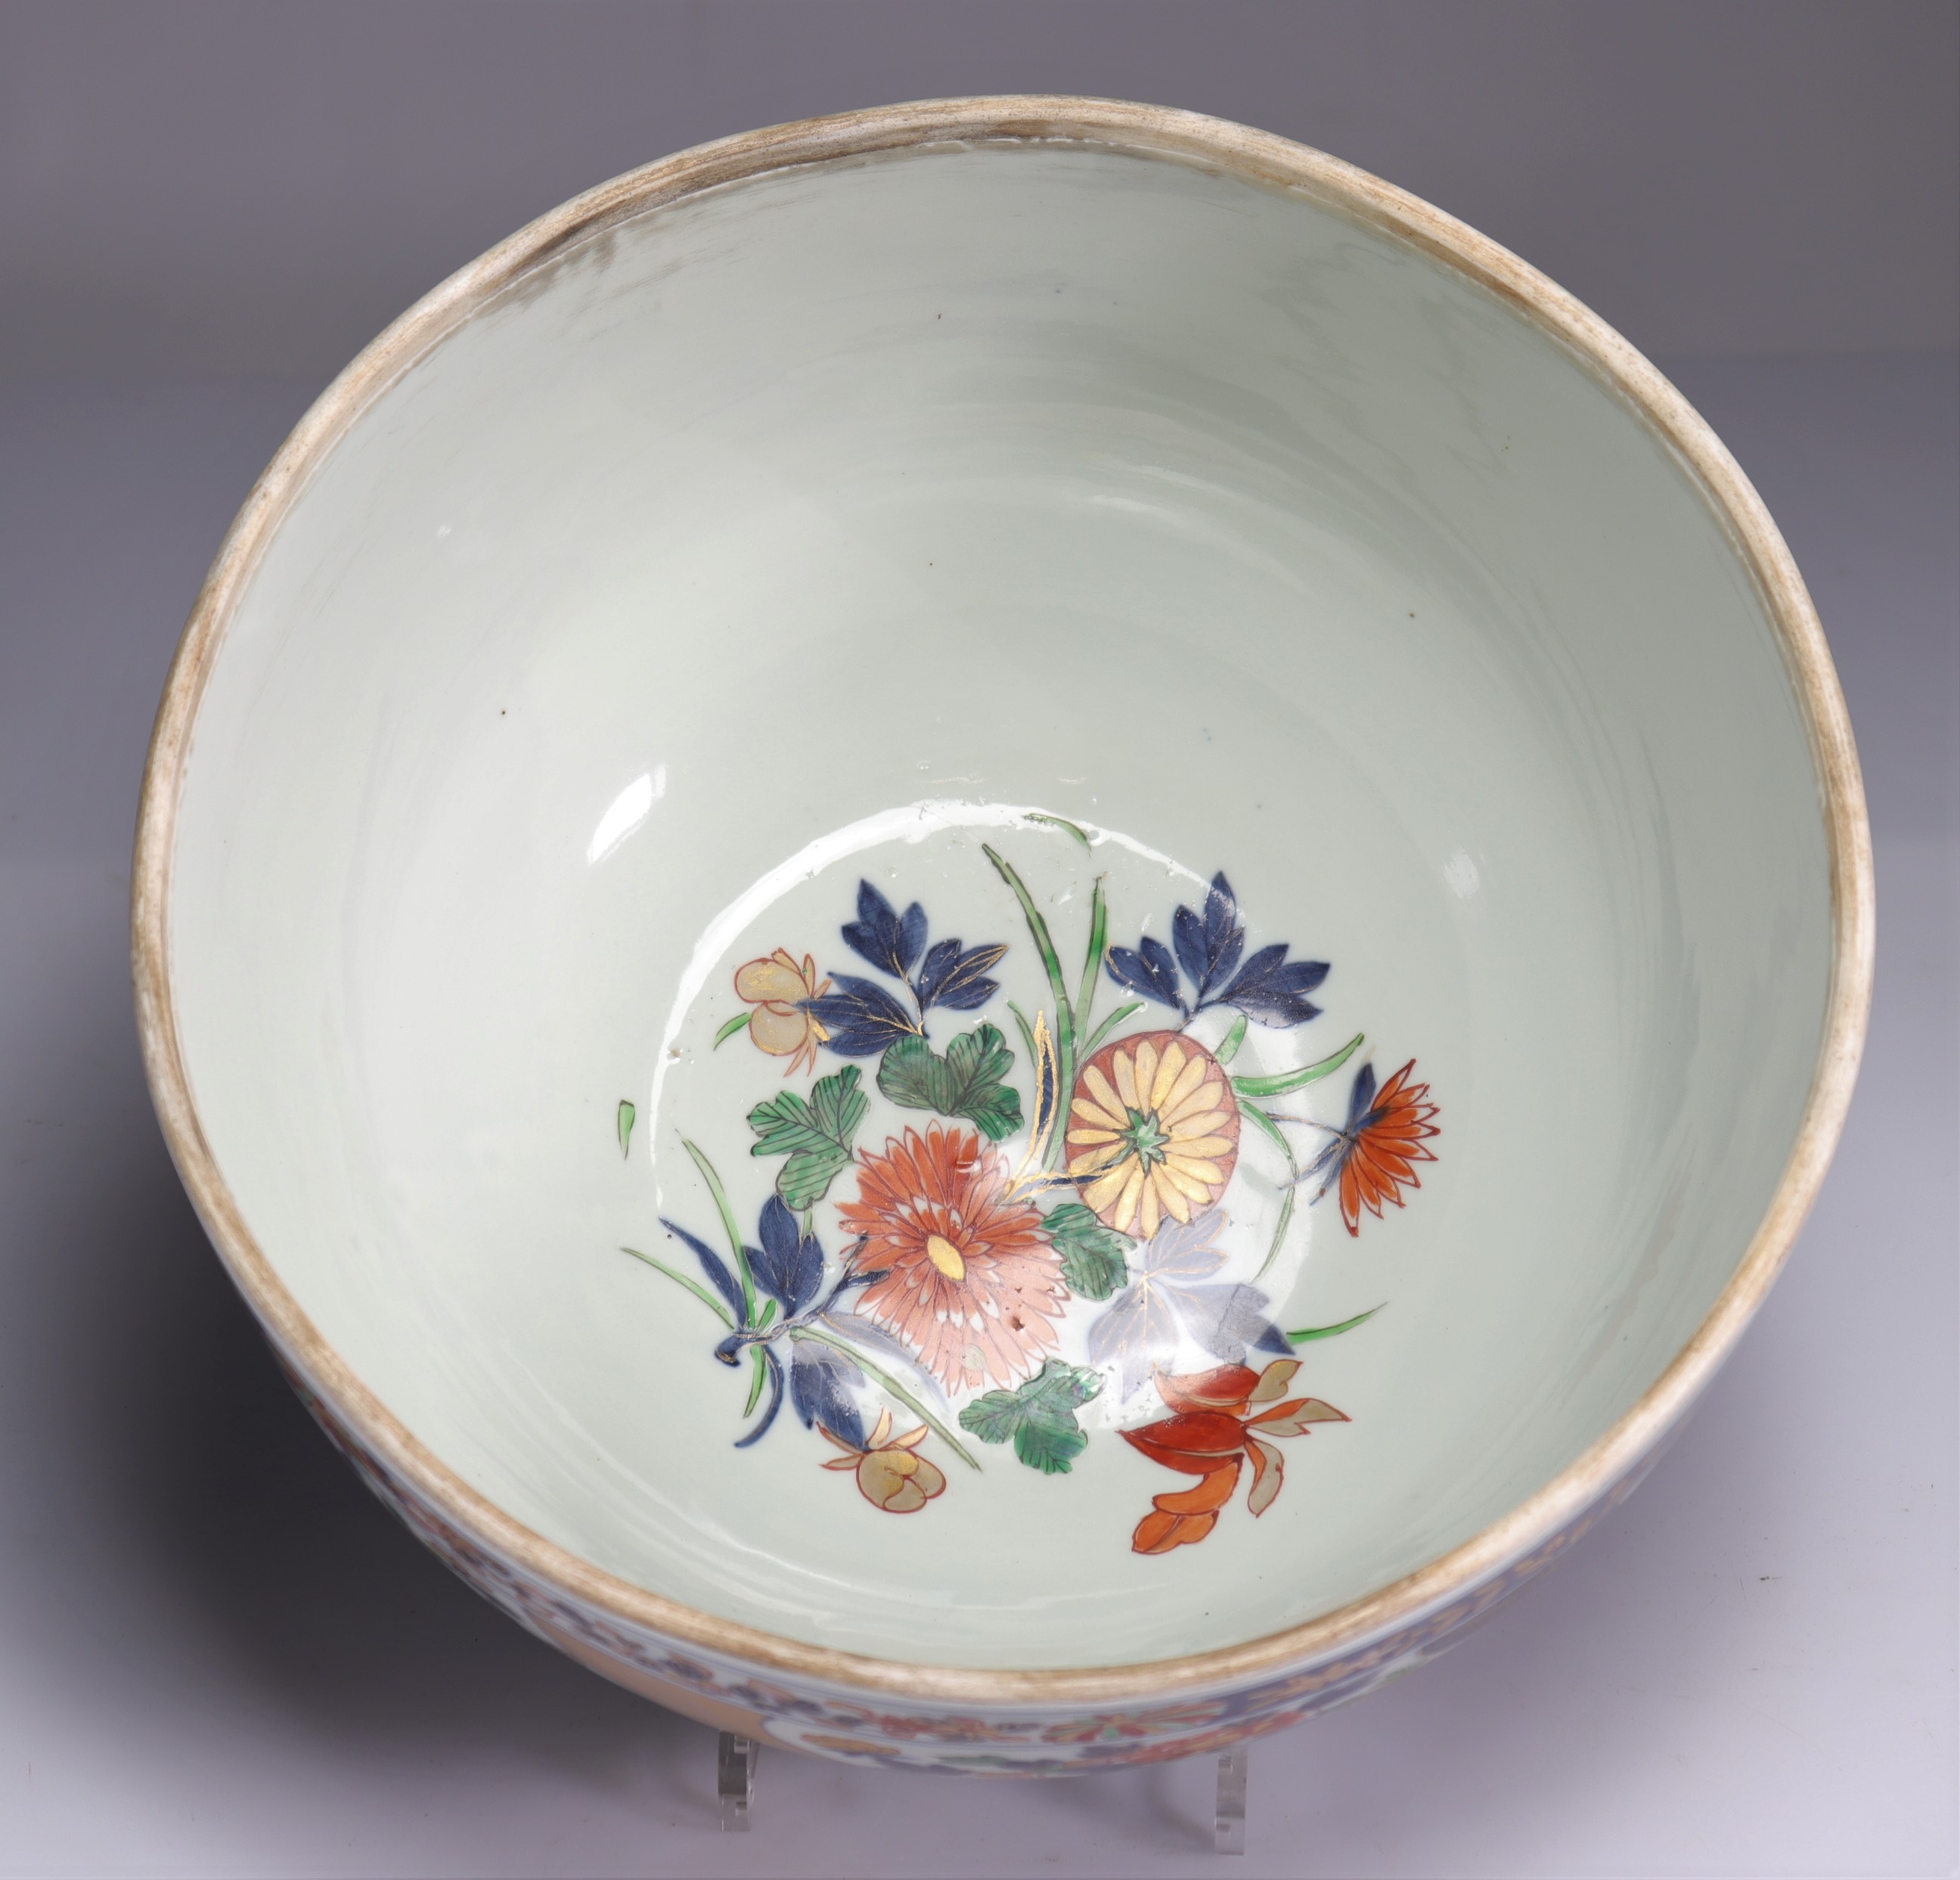 Imposing covered bowl in 18th century Japanese porcelain - Image 5 of 7